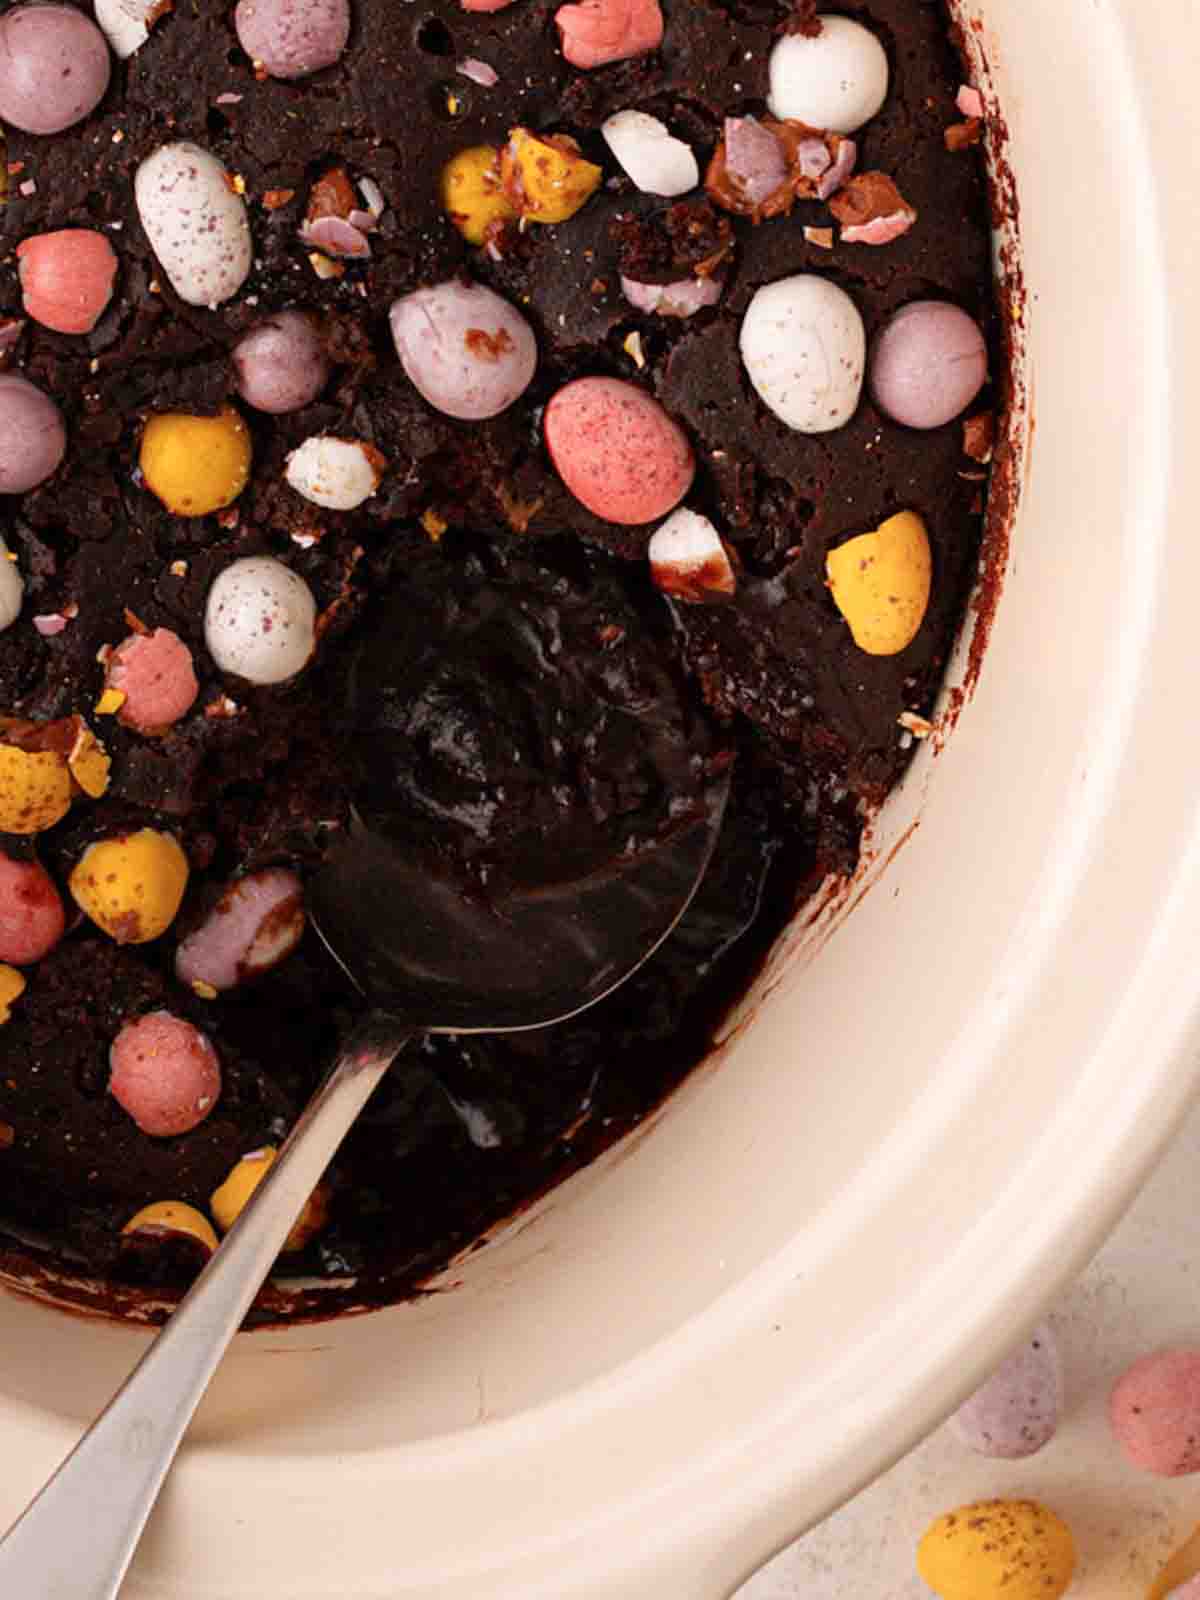 A spoon in a chocolate slow cooker pudding, revealing a gooey inside and mini eggs on top.